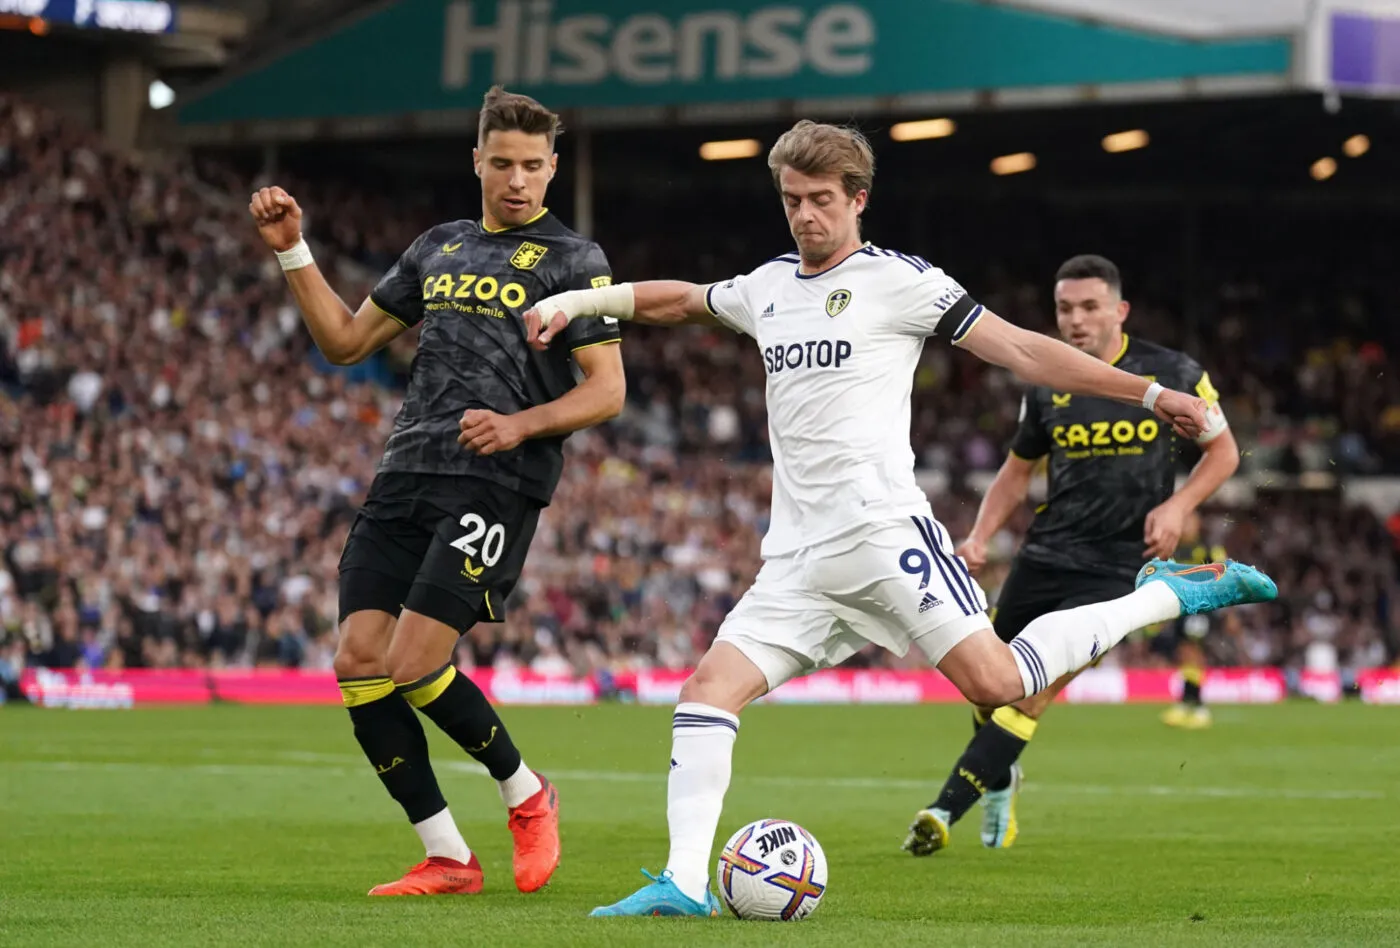 Leeds United's Patrick Bamford crosses the ball during the Premier League match at Elland Road, Leeds. Picture date: Sunday October 2, 2022. - Photo by Icon sport